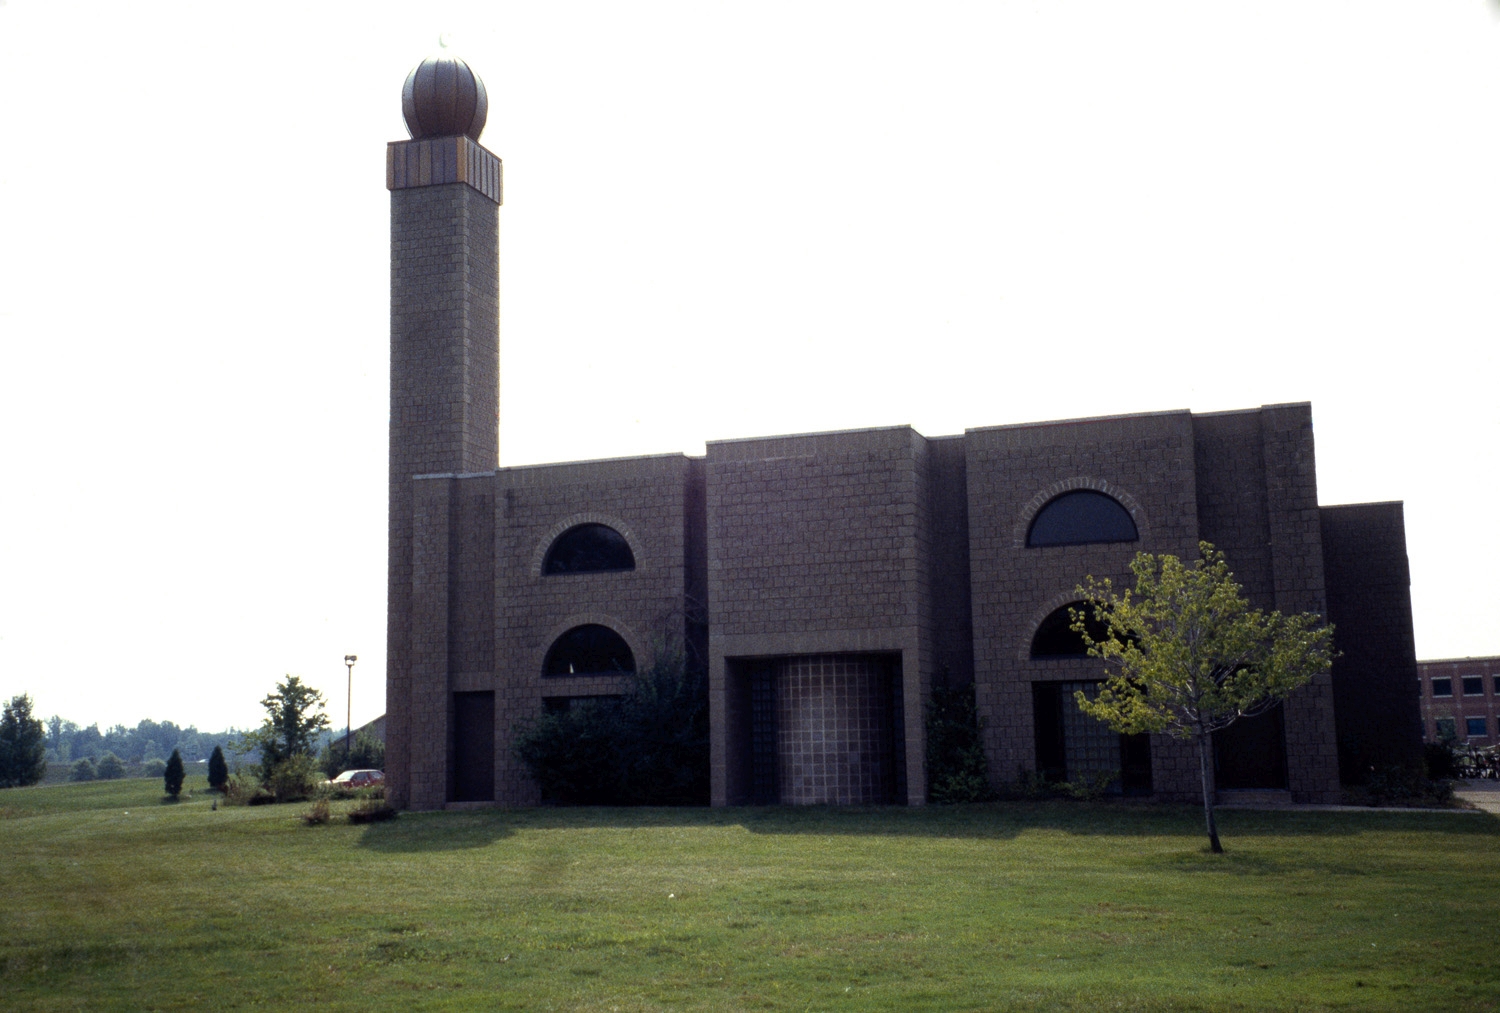 East facade, exterior view of Qibla wall. prior to expansion